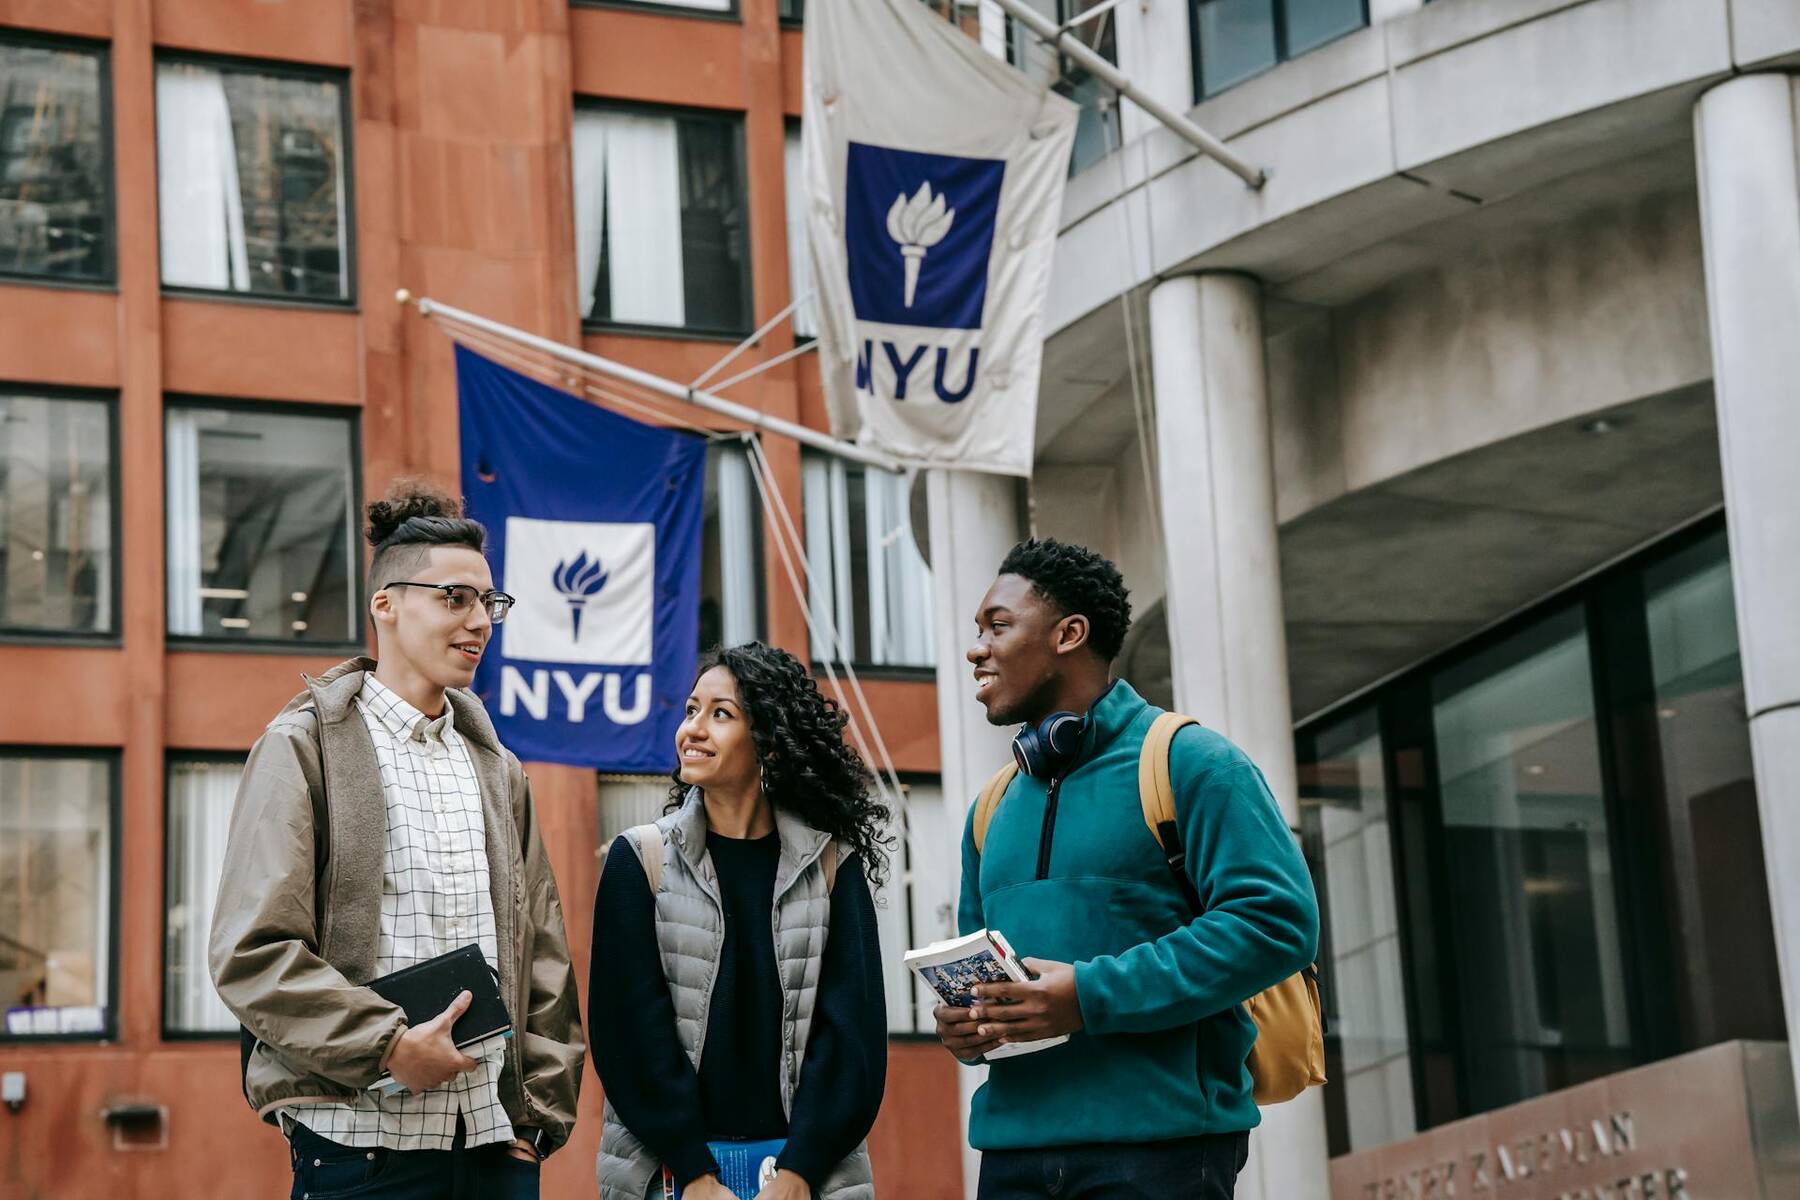 Three students engaged in conversation outside the NYU campus